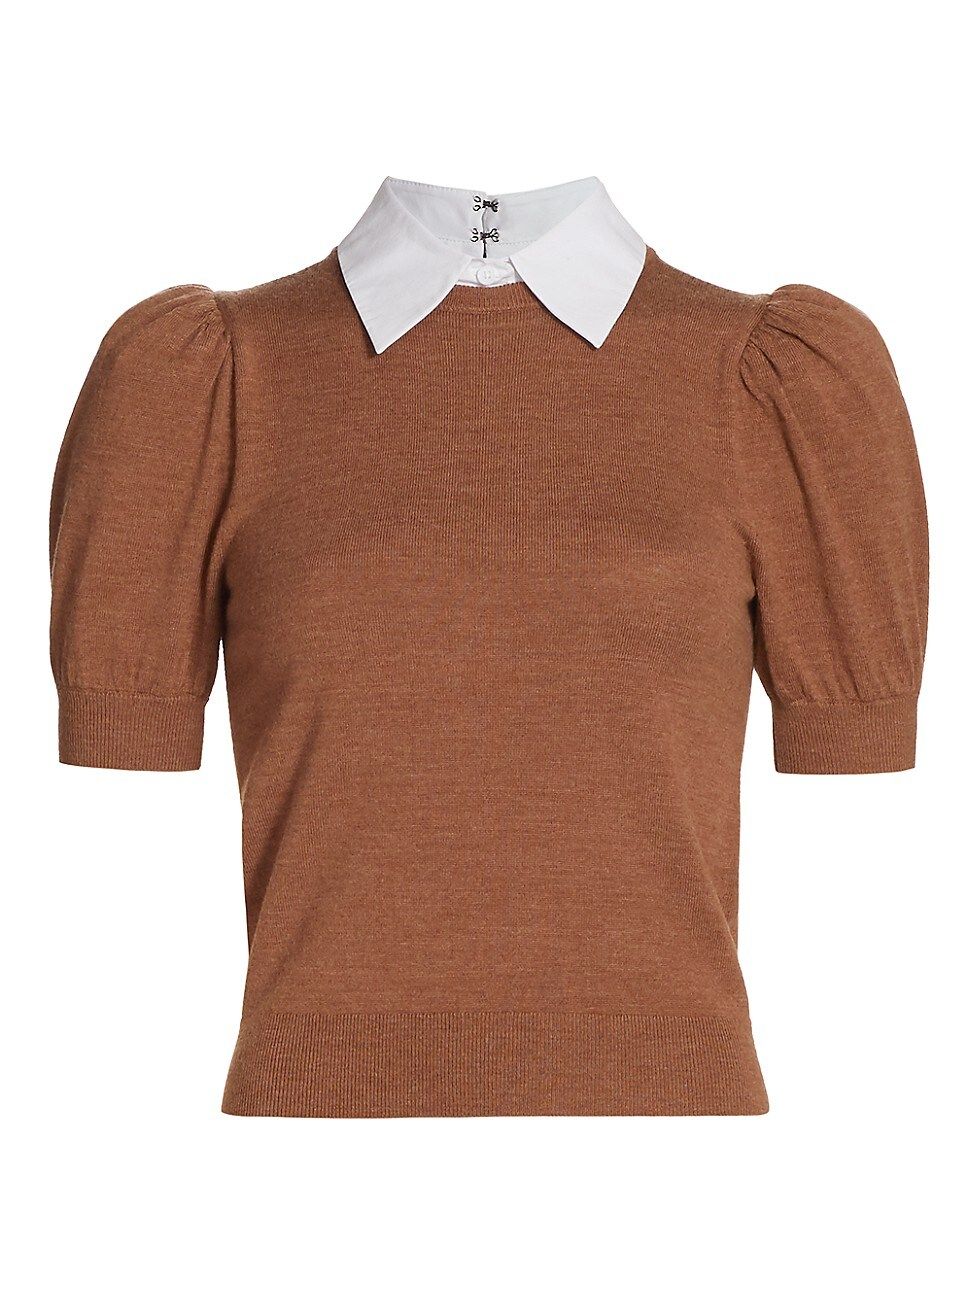 Alice + Olivia Women's Chase Puff-Sleeve Sweater - Camel White - Size XL | Saks Fifth Avenue